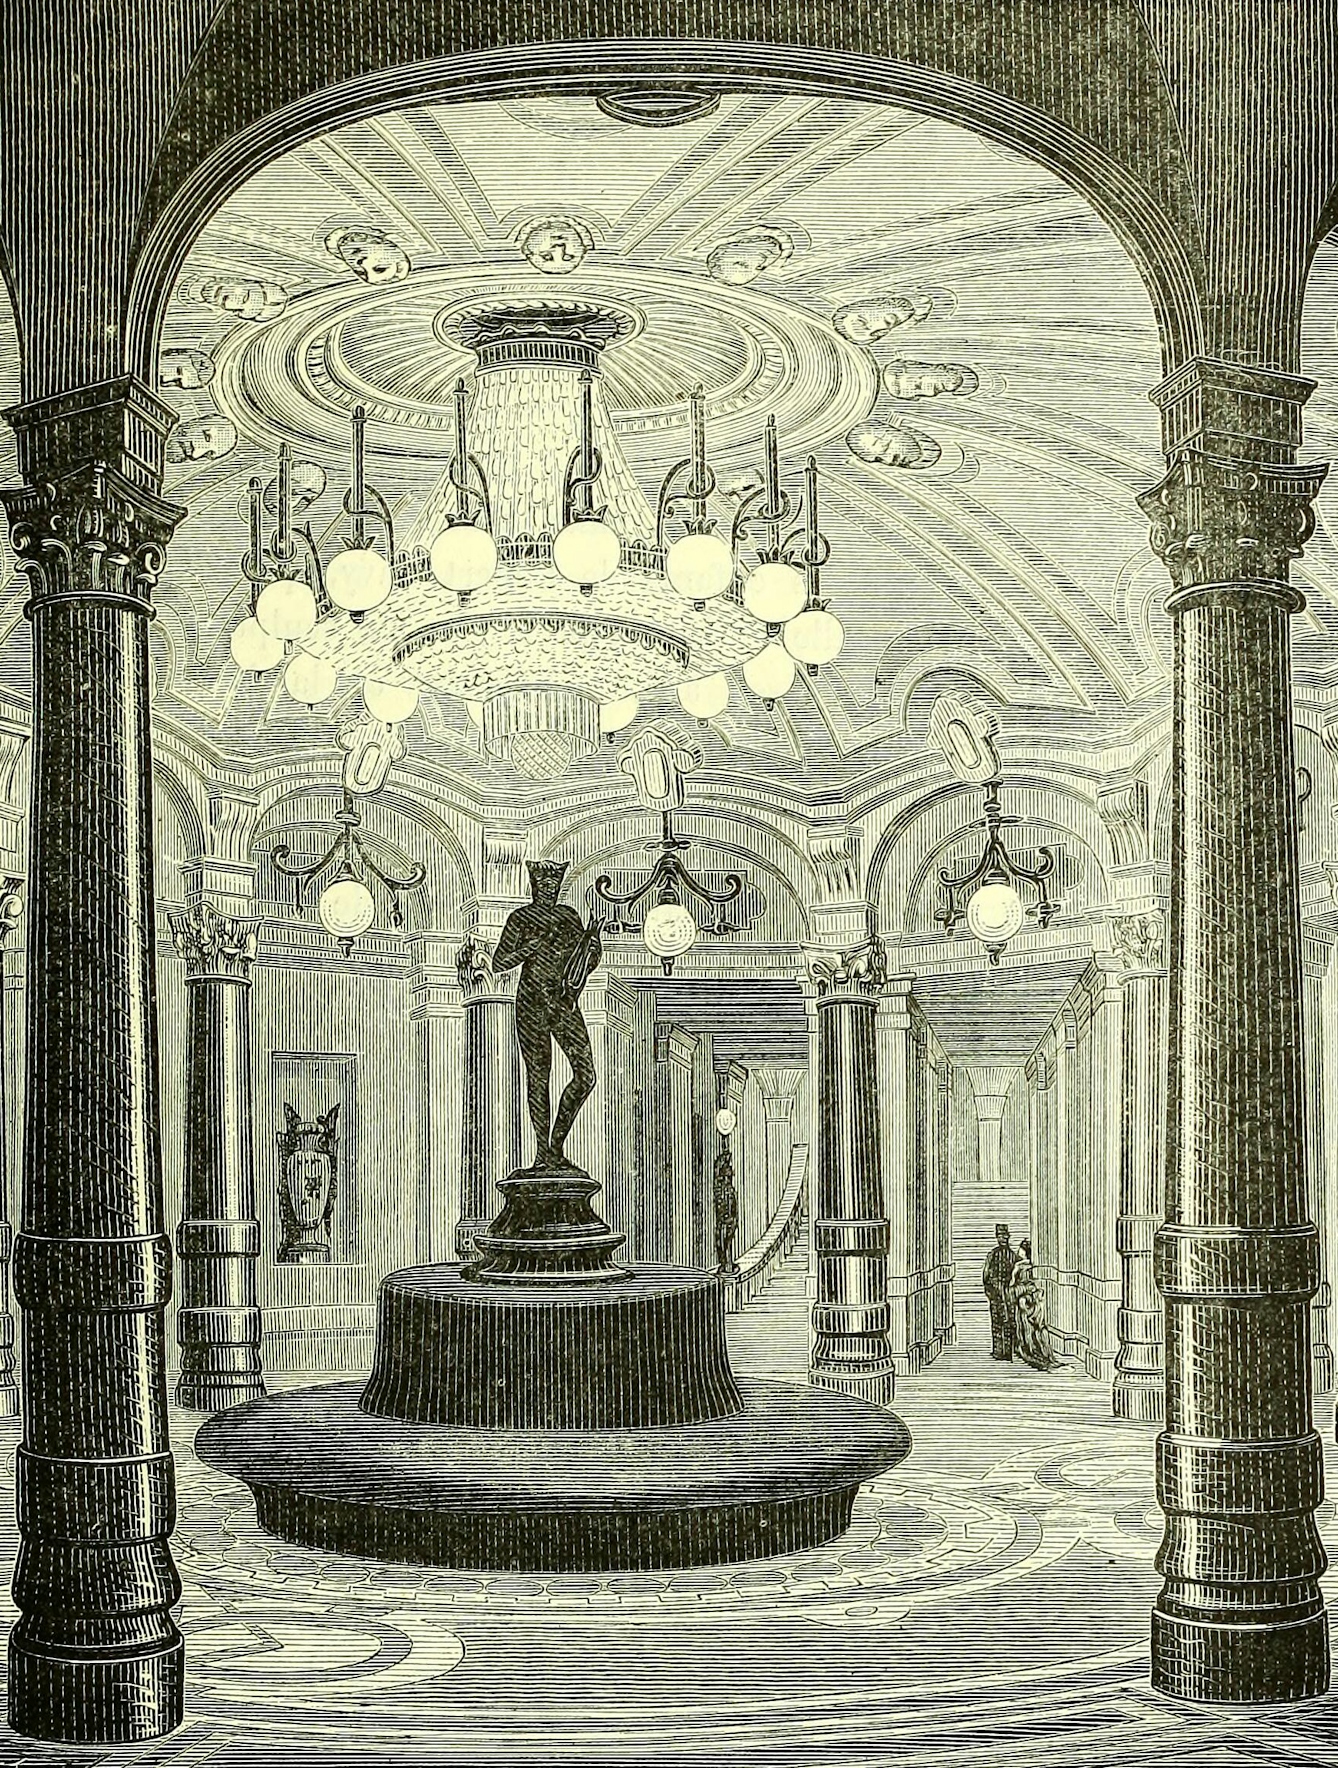 Werdermann chandeliers were used at the theatre de l’Opera to illuminate the foyer reserved for season ticket holders.